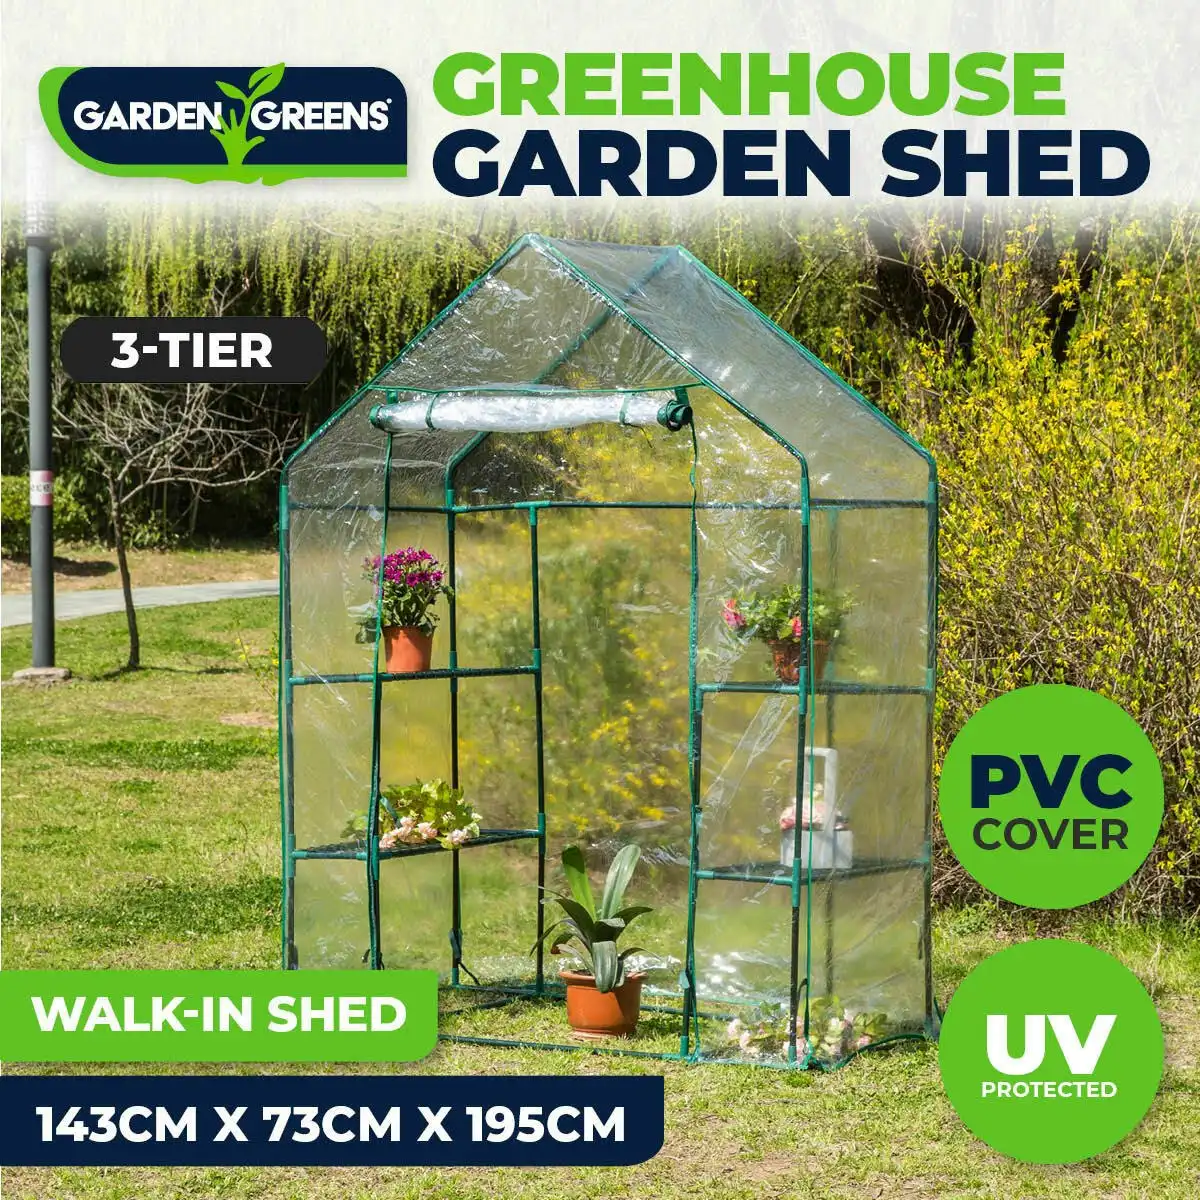 Garden Greens Greenhouse Walk-In Shed 3 Tier Solid Structure 1.43m x 76cm